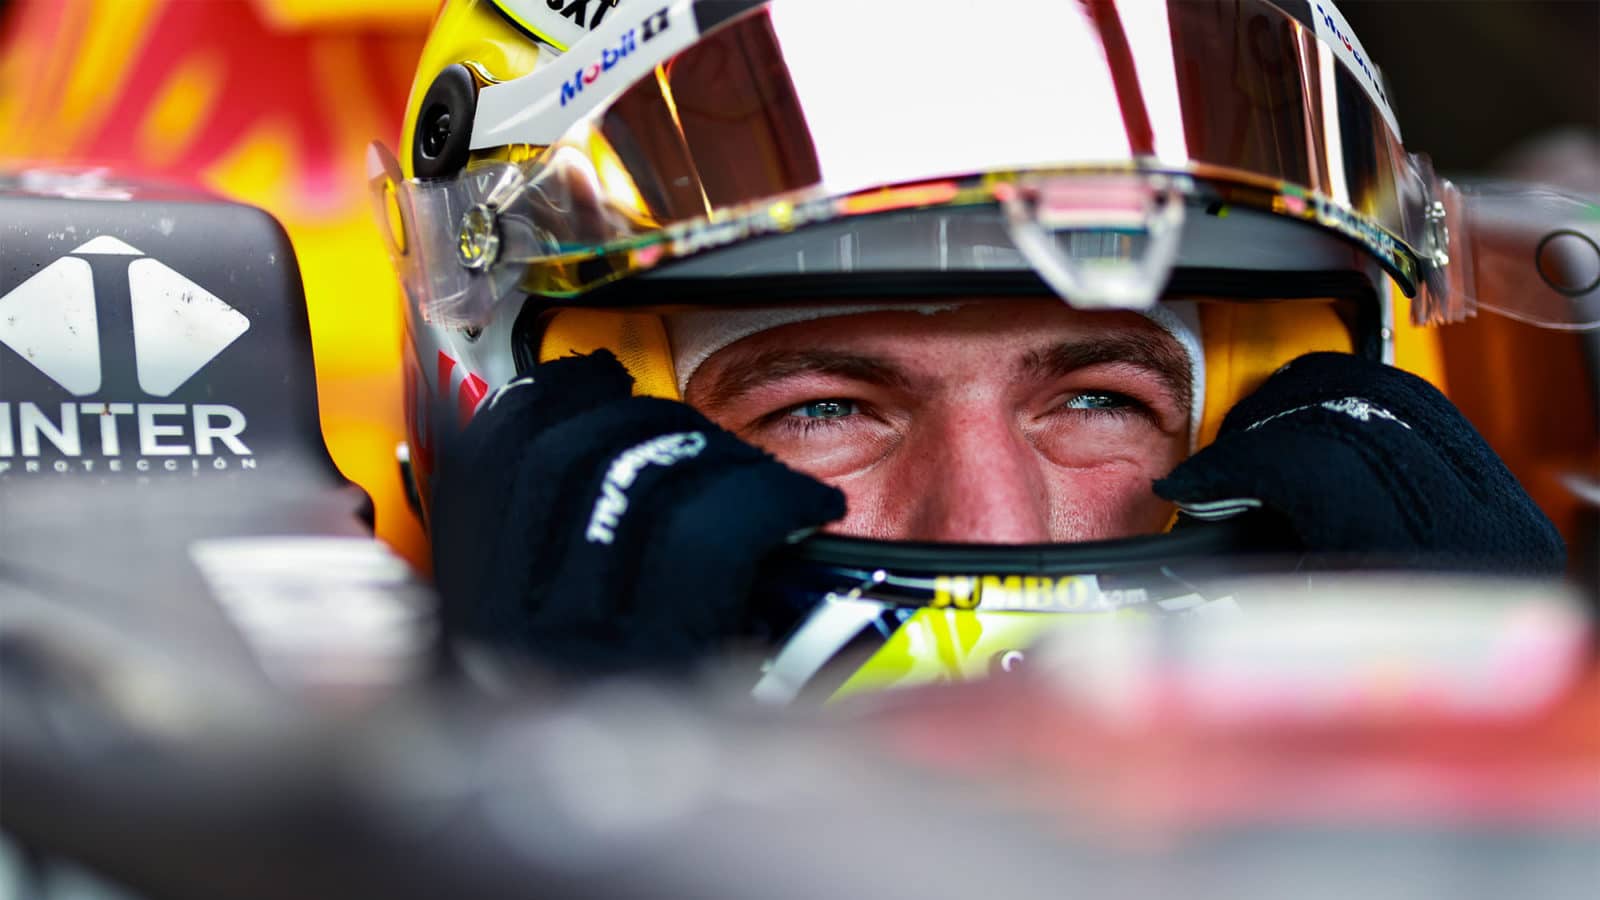 SPIELBERG, AUSTRIA - JUNE 25: Max Verstappen of Netherlands and Red Bull Racing prepares to drive in the garage during practice ahead of the F1 Grand Prix of Styria at Red Bull Ring on June 25, 2021 in Spielberg, Austria. (Photo by Mark Thompson/Getty Images)